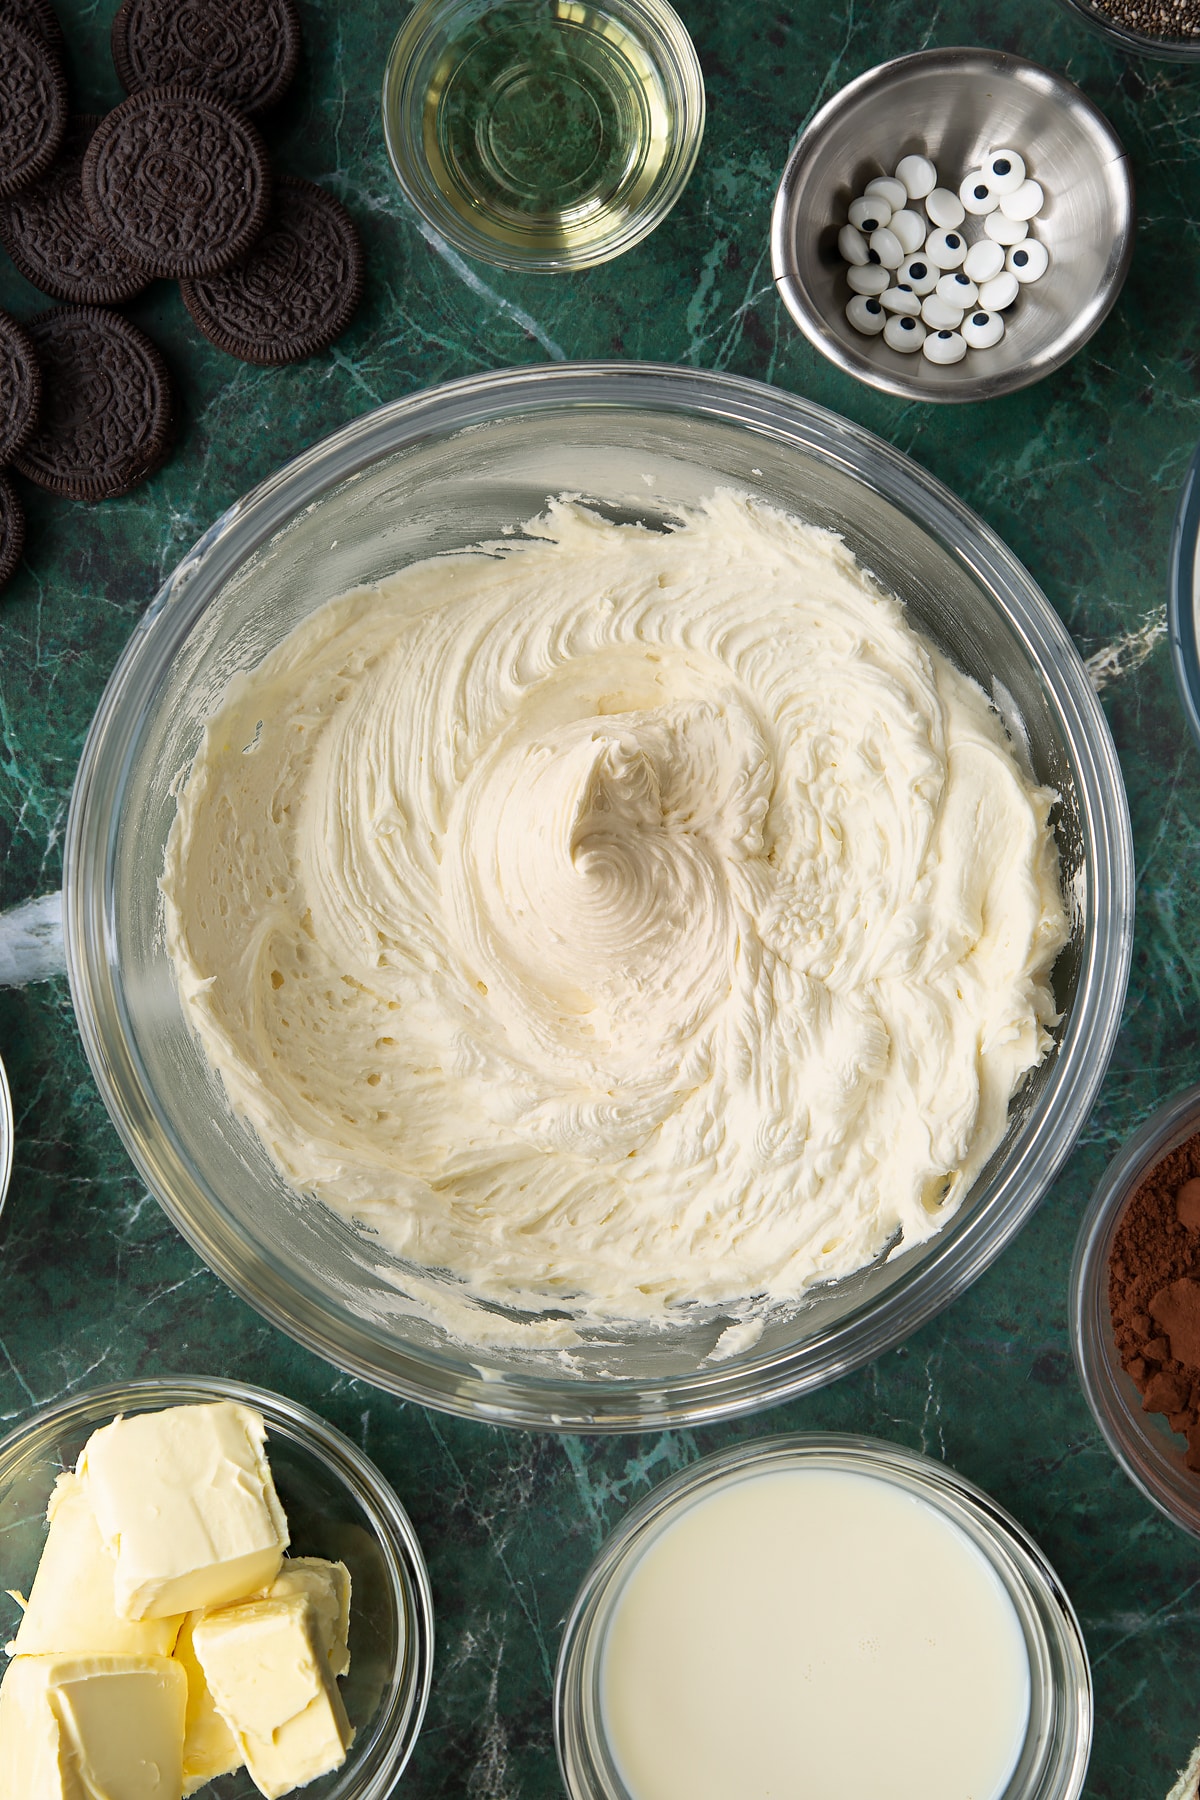 Whipped vegan vanilla frosting in a glass mixing bowl. Ingredients to make vegan Halloween cupcakes surround the bowl.